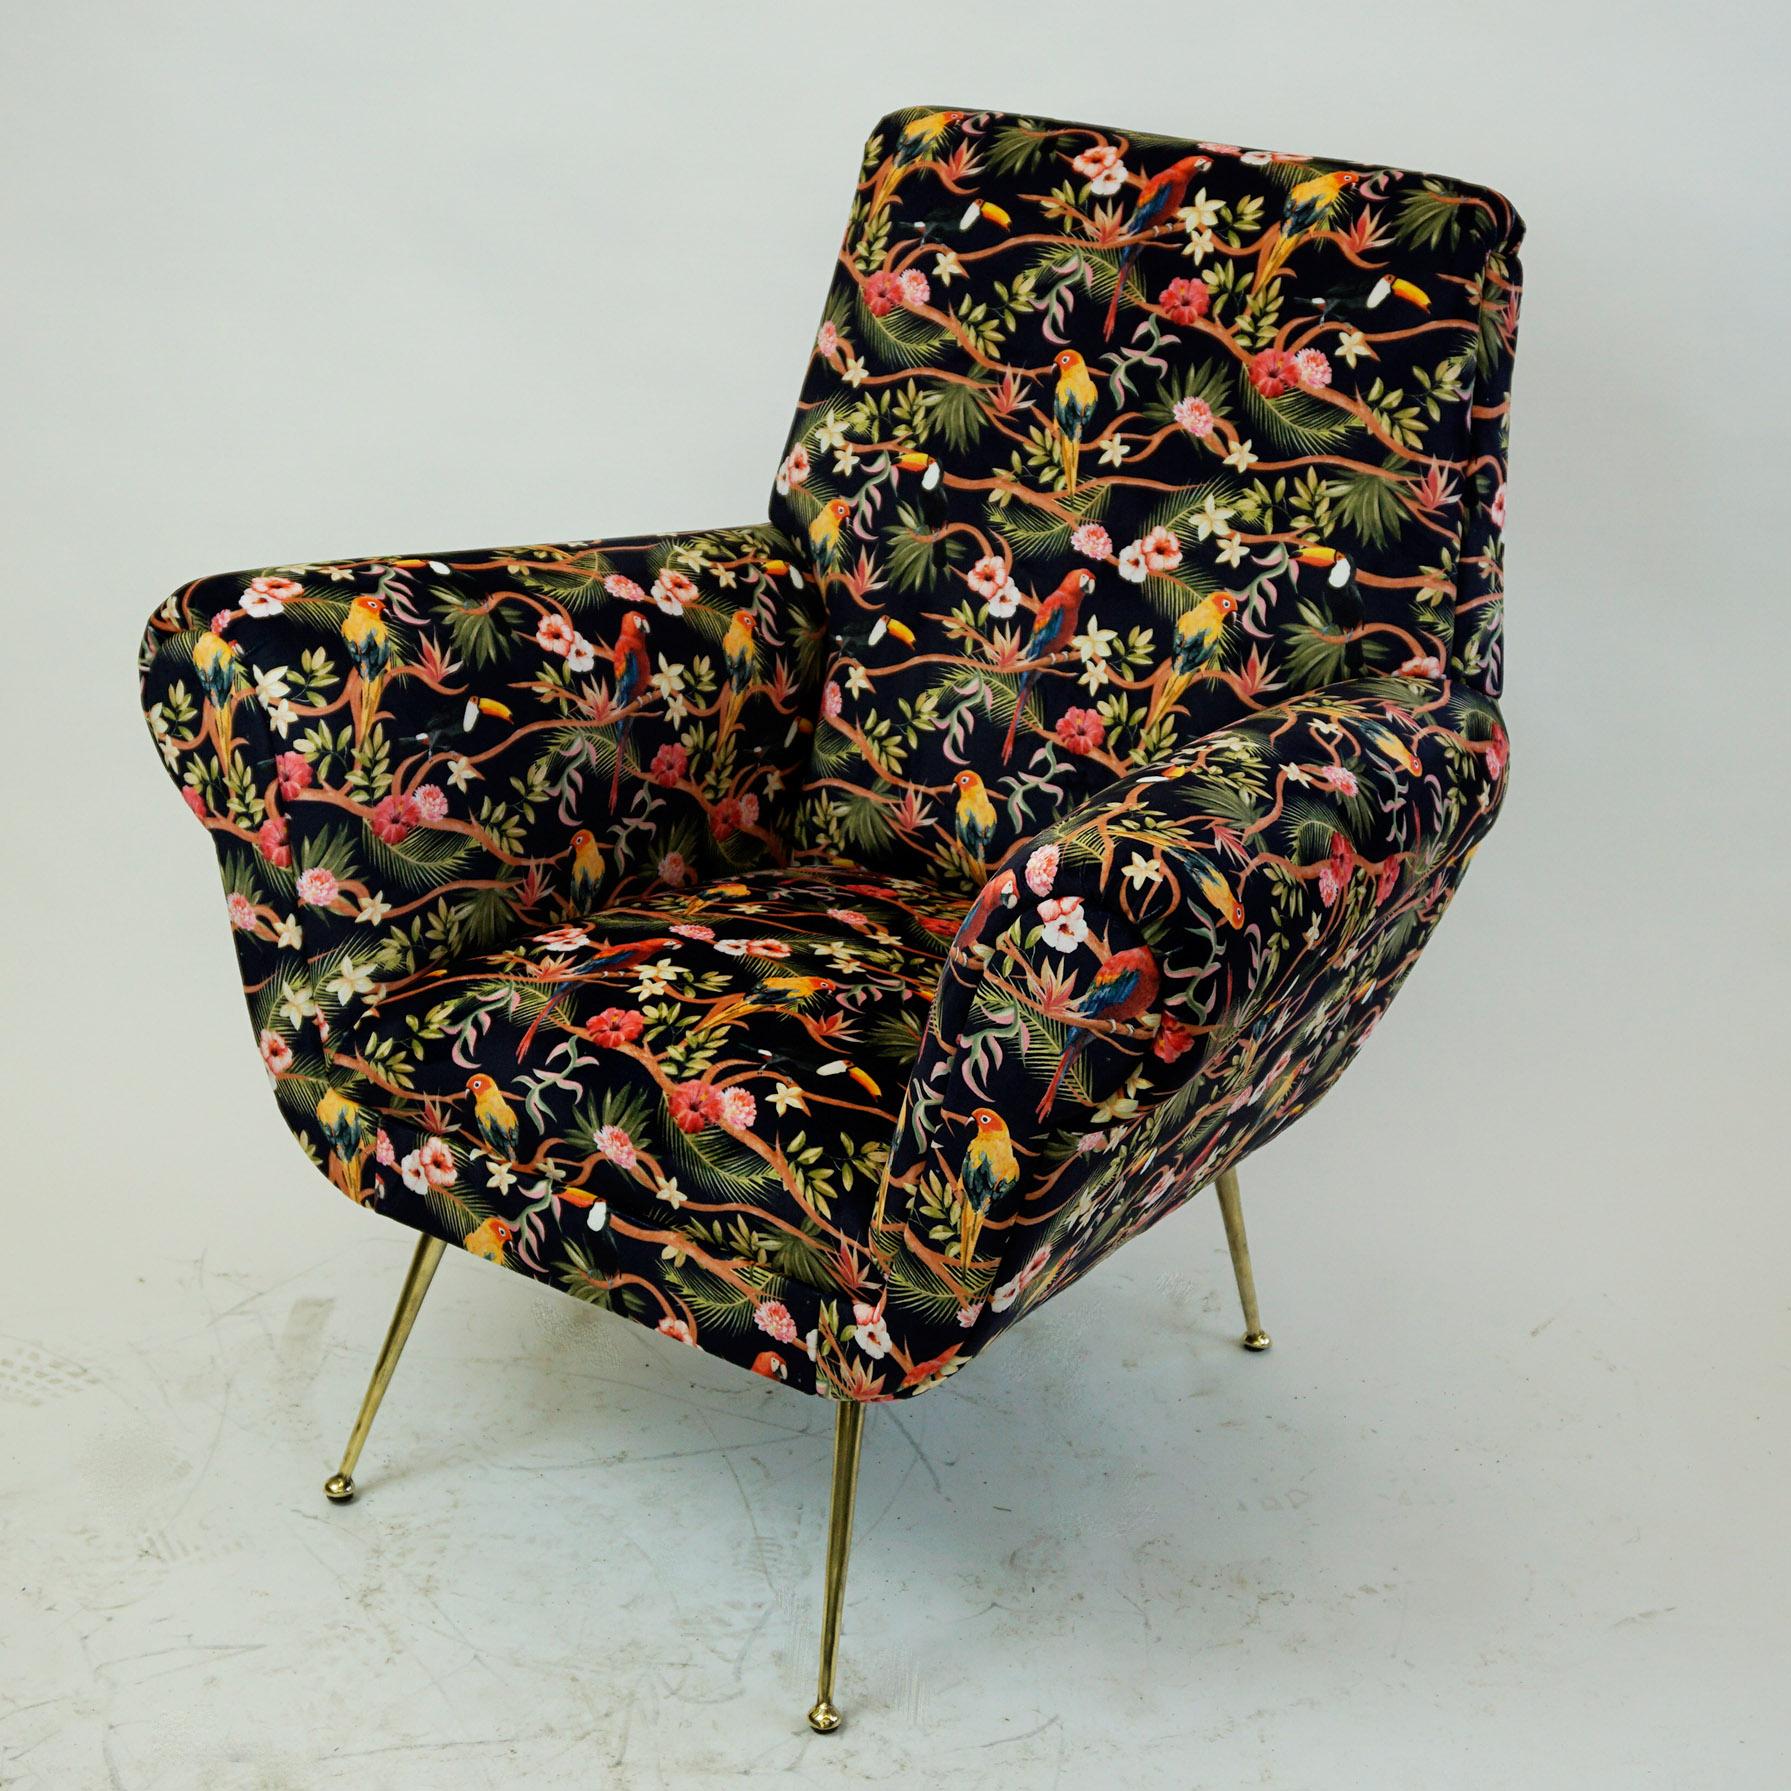 Amazing and comfortable Italian Mid-Century Modern Loungechair with new top quality black Velvet with floral ornaments and birds. It features a solid wooden frame with elegant brass legs. A perfect highlight for any Mid-Century Modern interior!